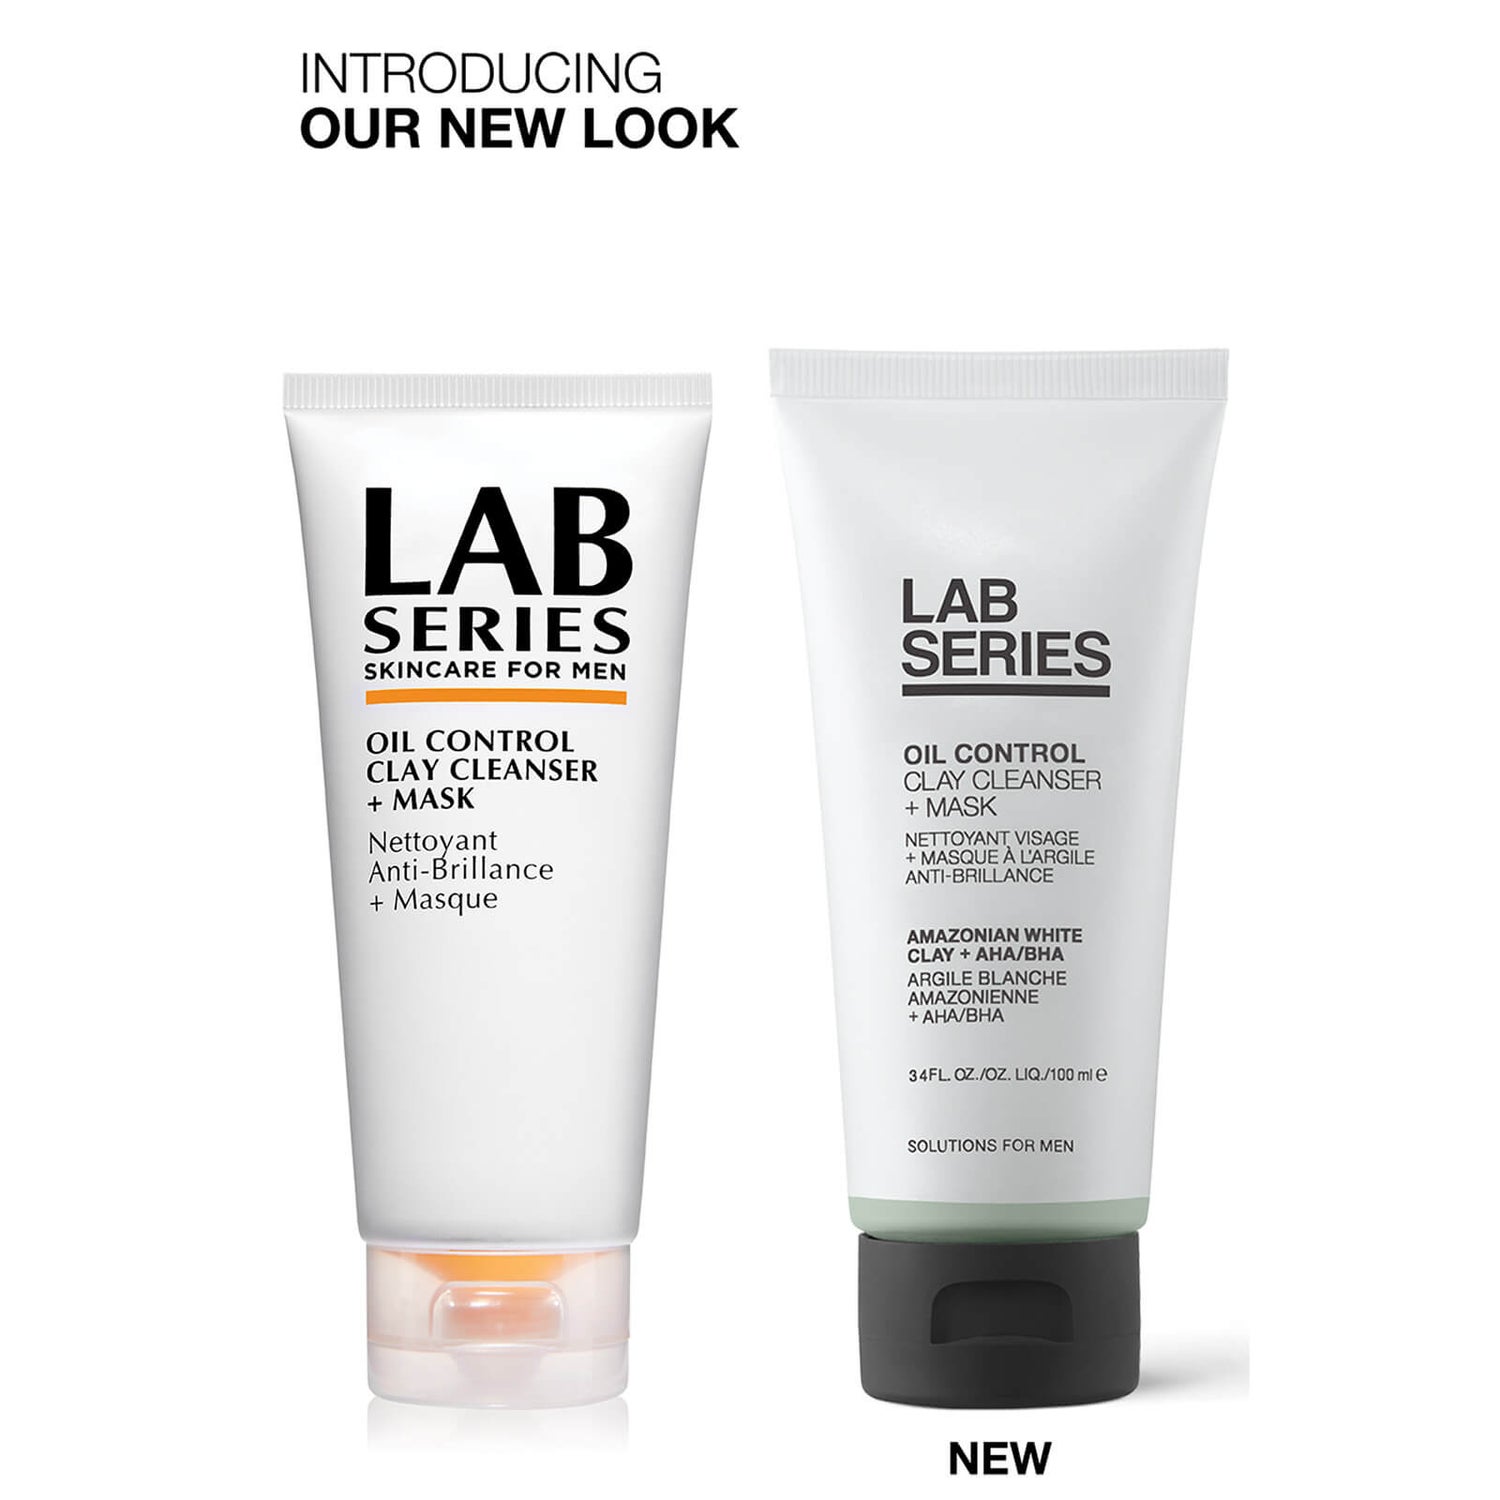 Lab Series Skincare for Men Oil Control Clay Cleanser and Mask 100ml